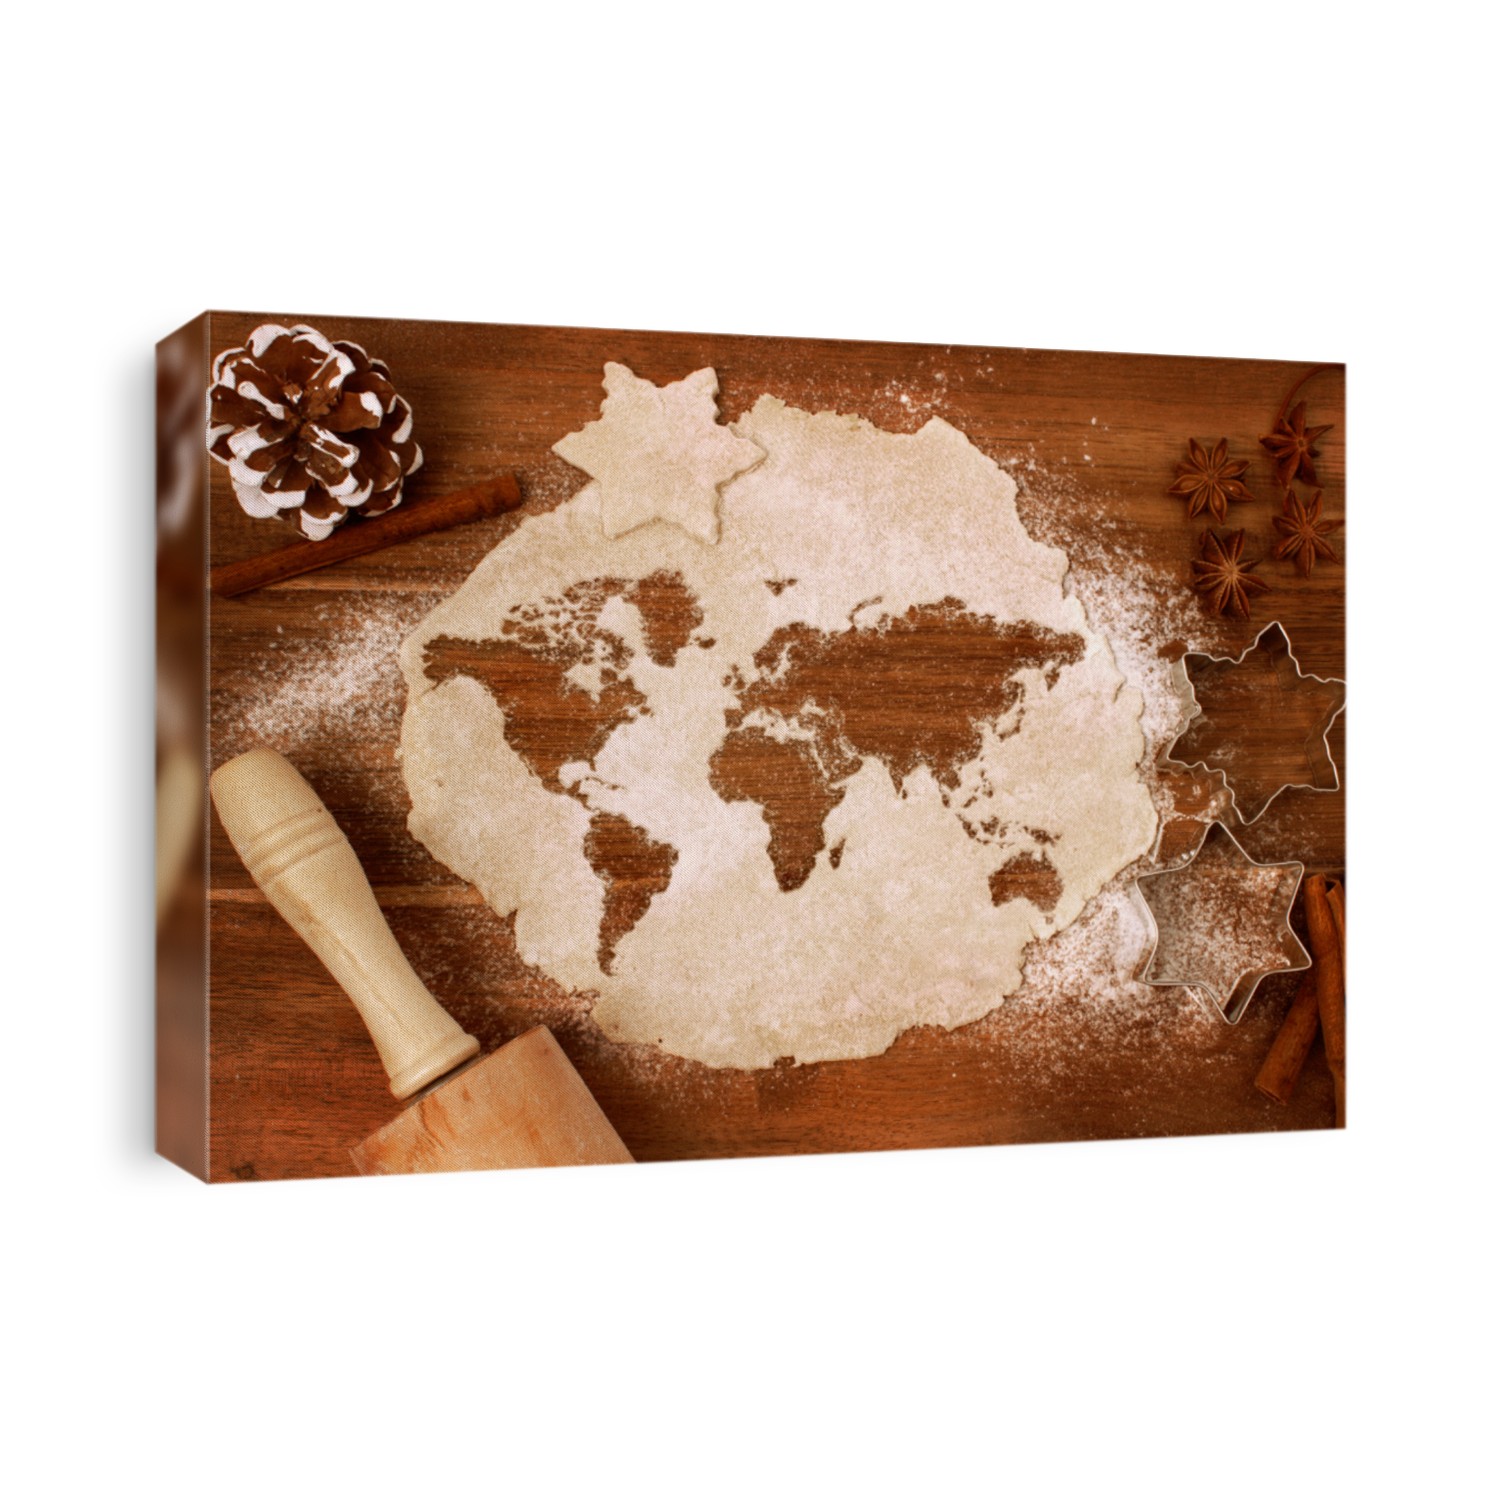 Festive cookie dough with the shape of the world cut out (series)